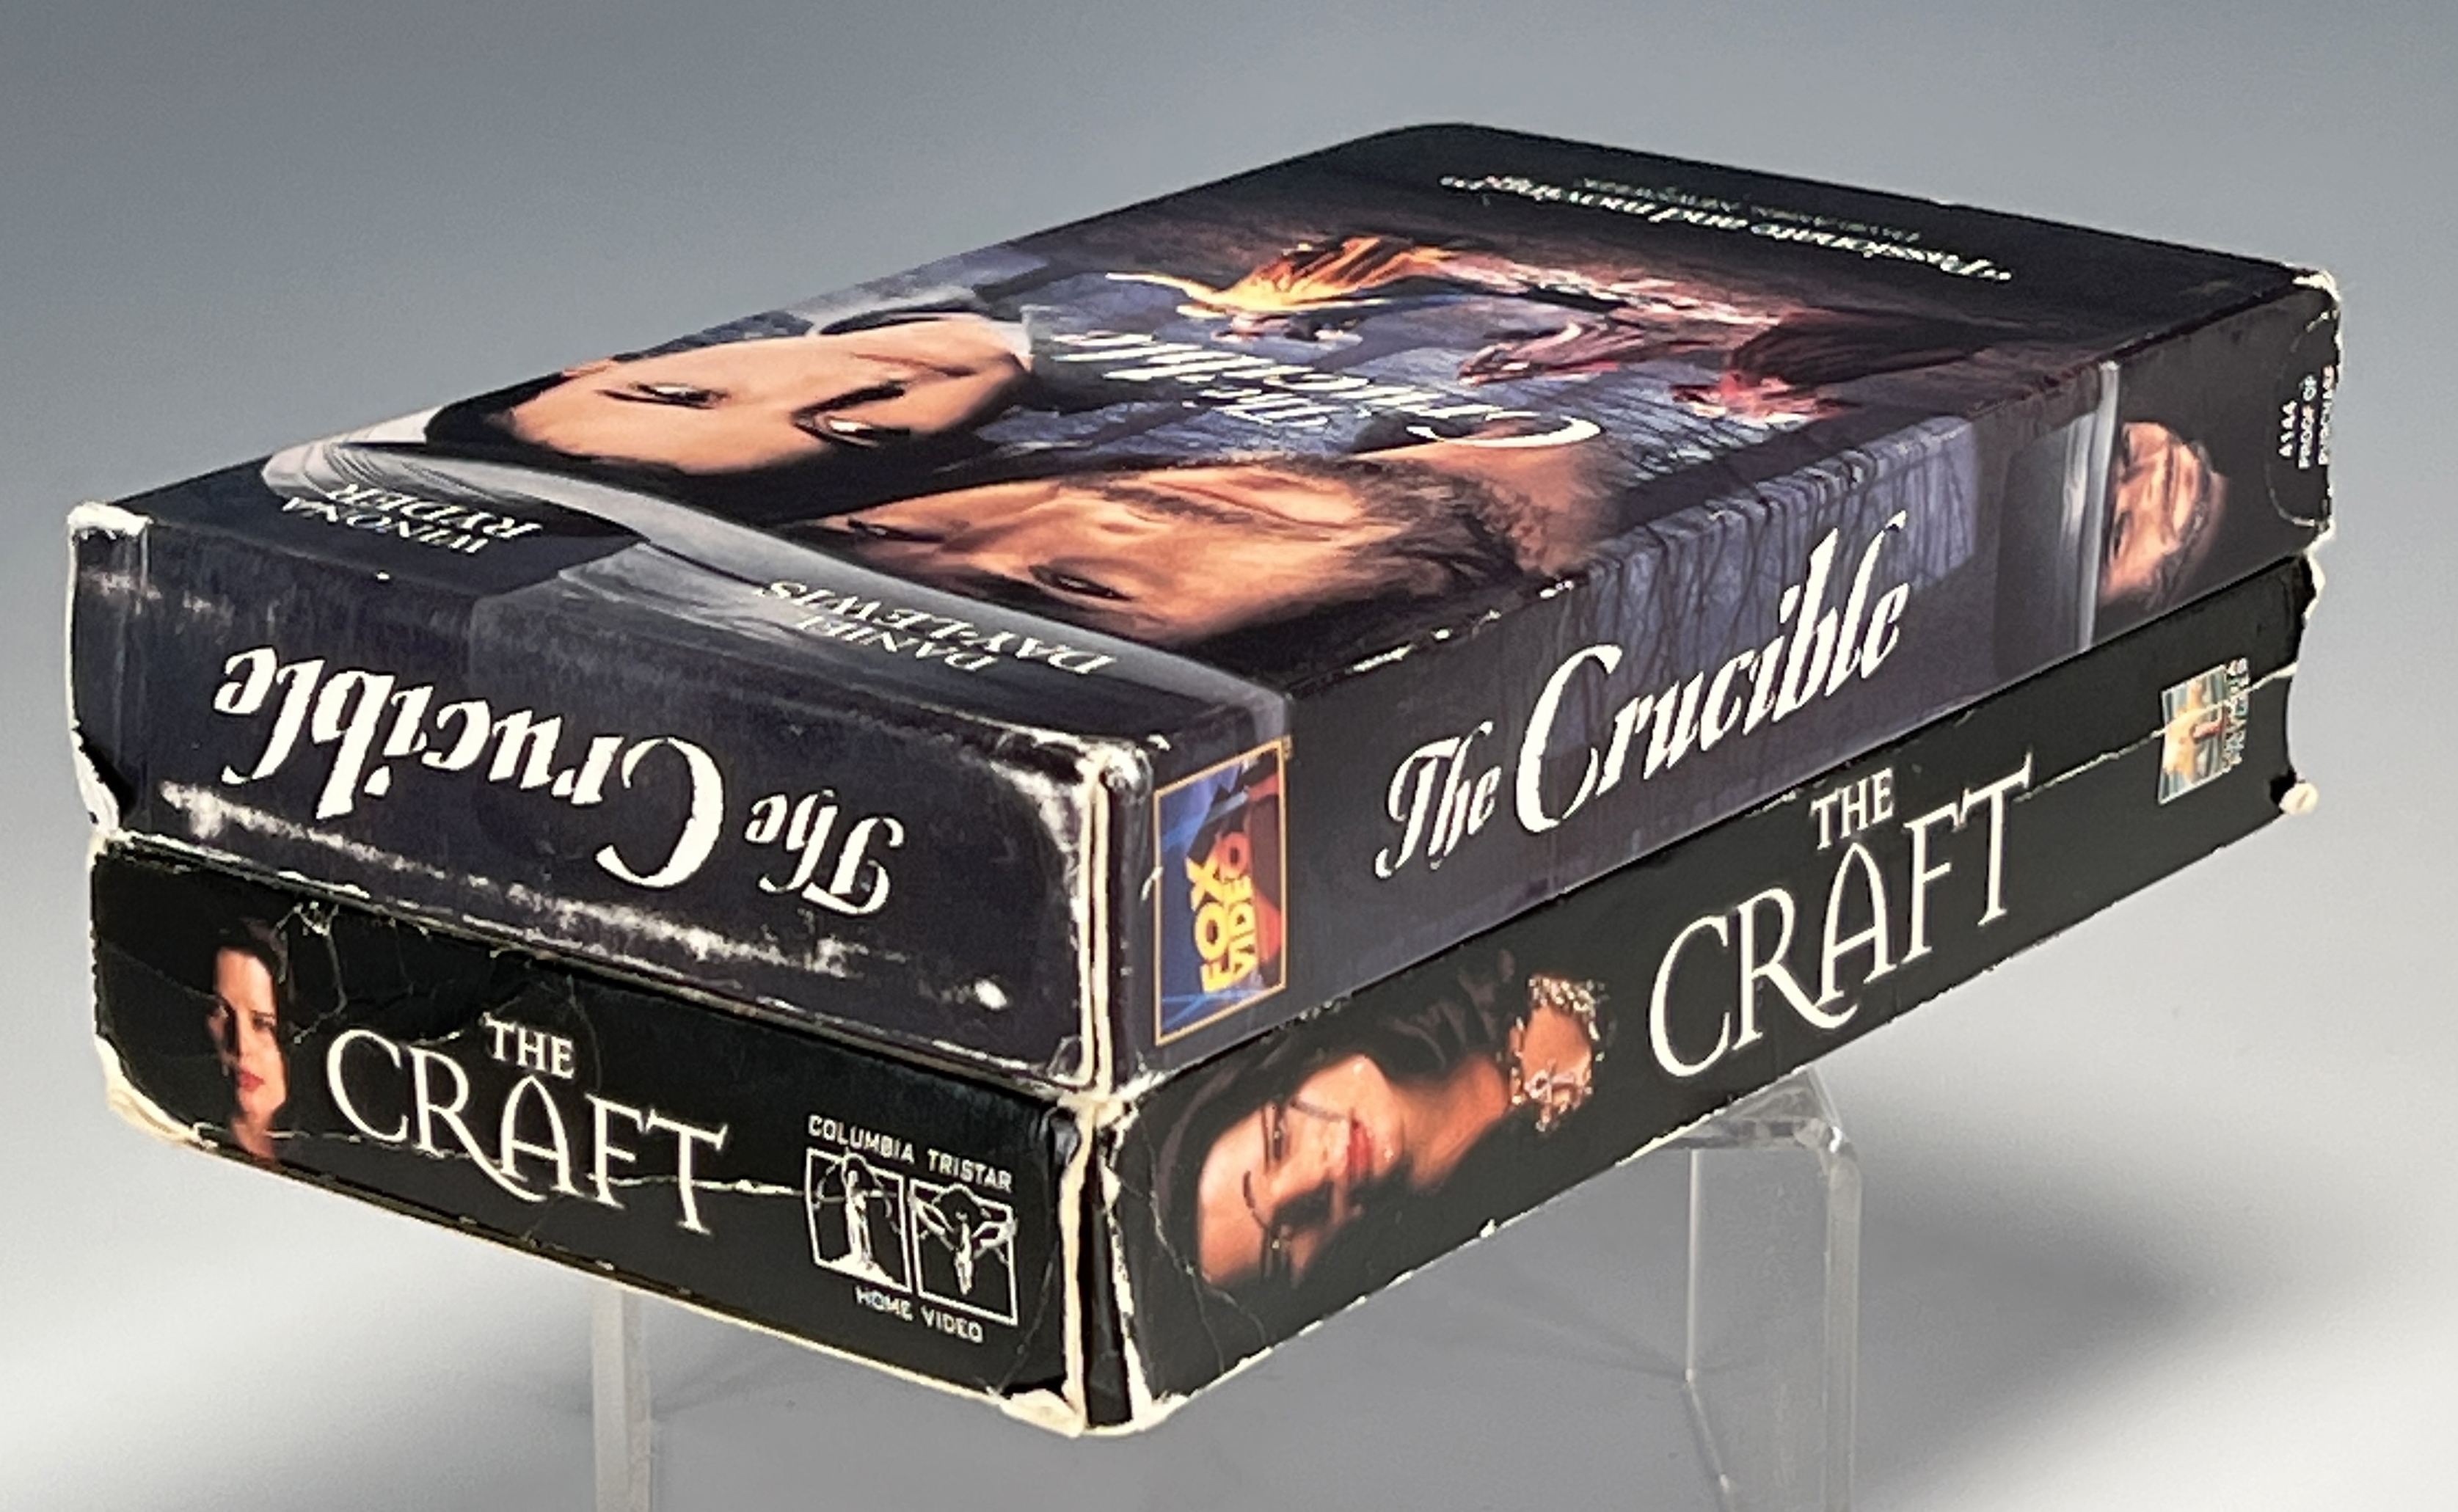 The Craft & The Crucible Vhs Daniel Day-Lewis image 7